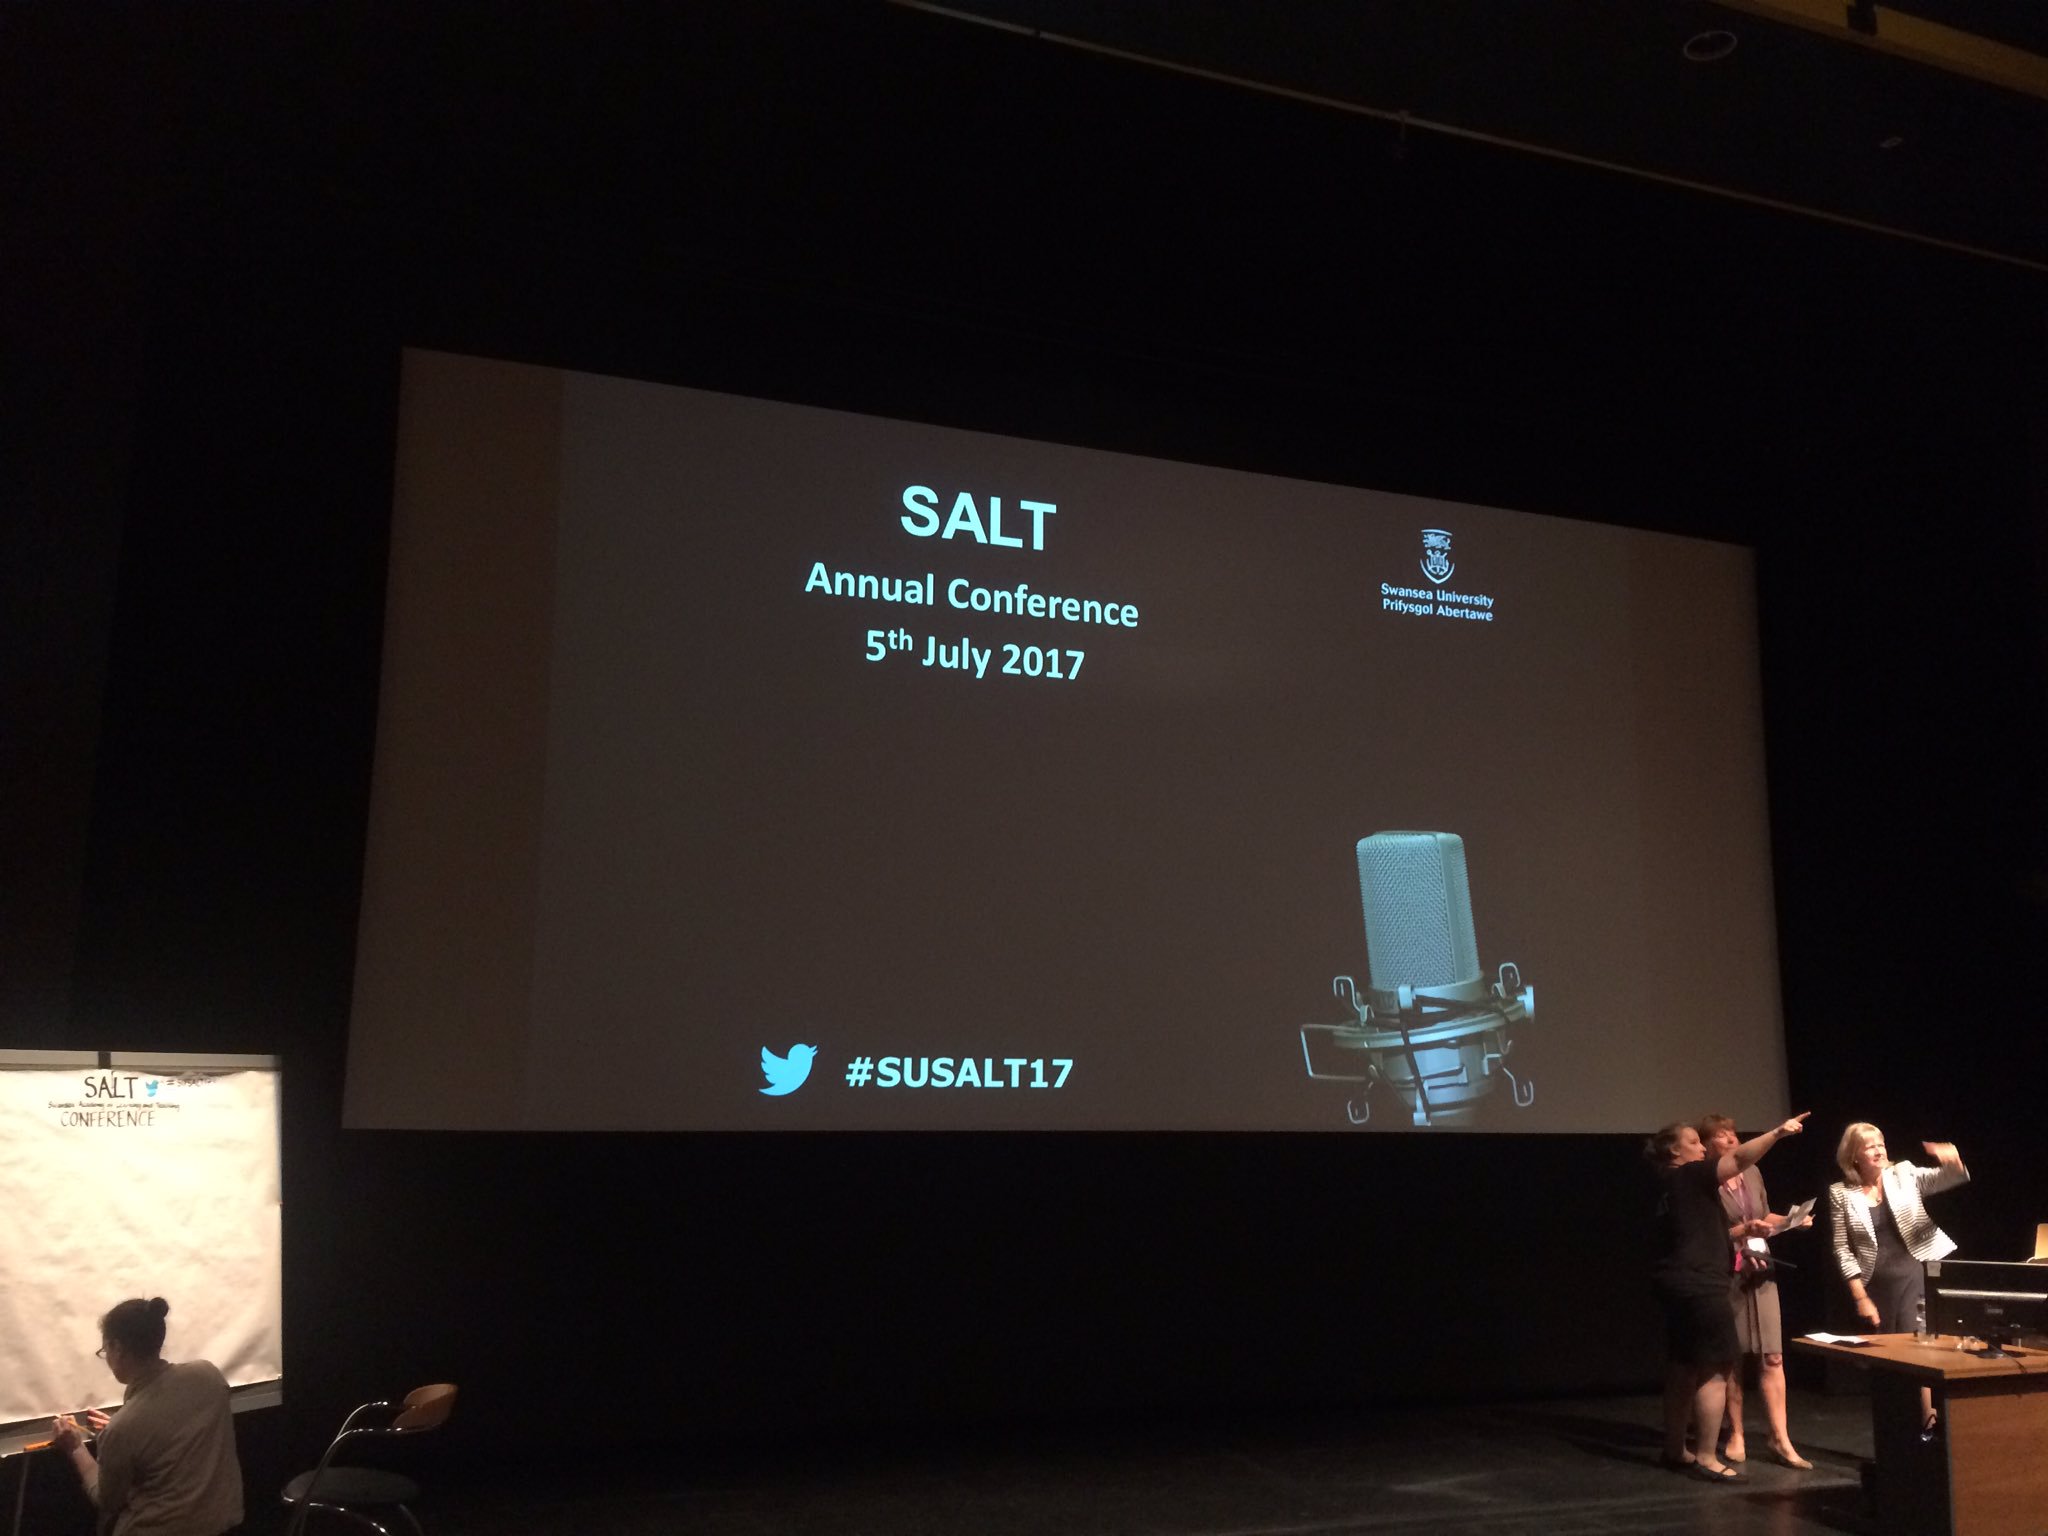 Looking forward for today's Salt annual conference #susalt17 https://t.co/MRigjDqGYy